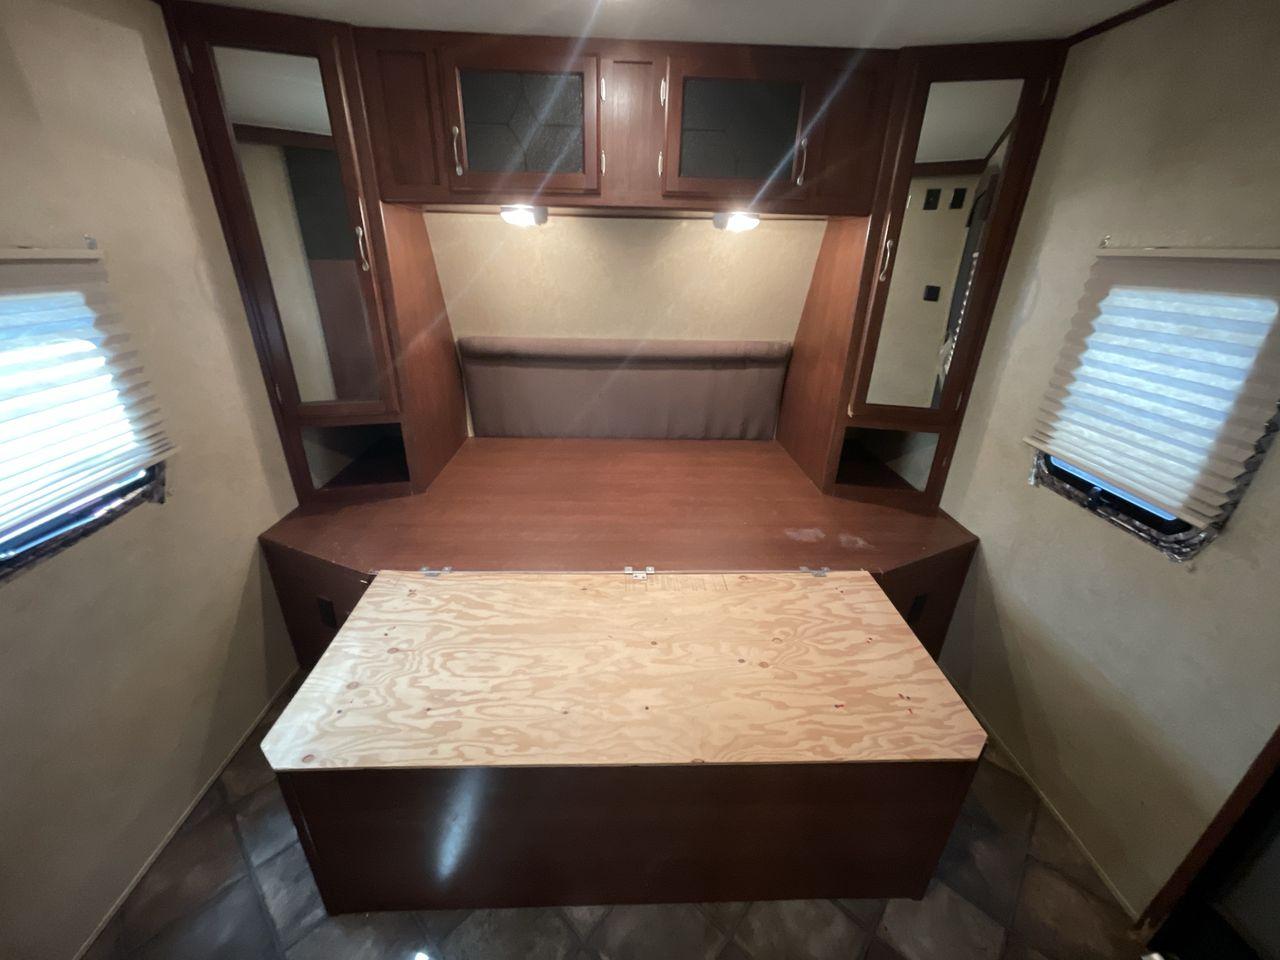 2014 WHITE EVERGREEN I GO 281RLDS (5ZWTGPE20E1) , Length: 32.42 ft | Dry Weight: 5,752 lbs | Gross Weight: 8,795 lbs | Slides: 1 transmission, located at 4319 N Main Street, Cleburne, TX, 76033, (817) 221-0660, 32.435829, -97.384178 - Enjoy the freedom of the open road with the 2014 EverGreen iGo 281RLDS Travel Trailer! This trailer is your ticket to amazing trips with family and friends. The iGo, measuring 32.42 feet long and weighing 5,752 pounds dry, is both large and lightweight, making it easy to pull and handle. With a gros - Photo #15